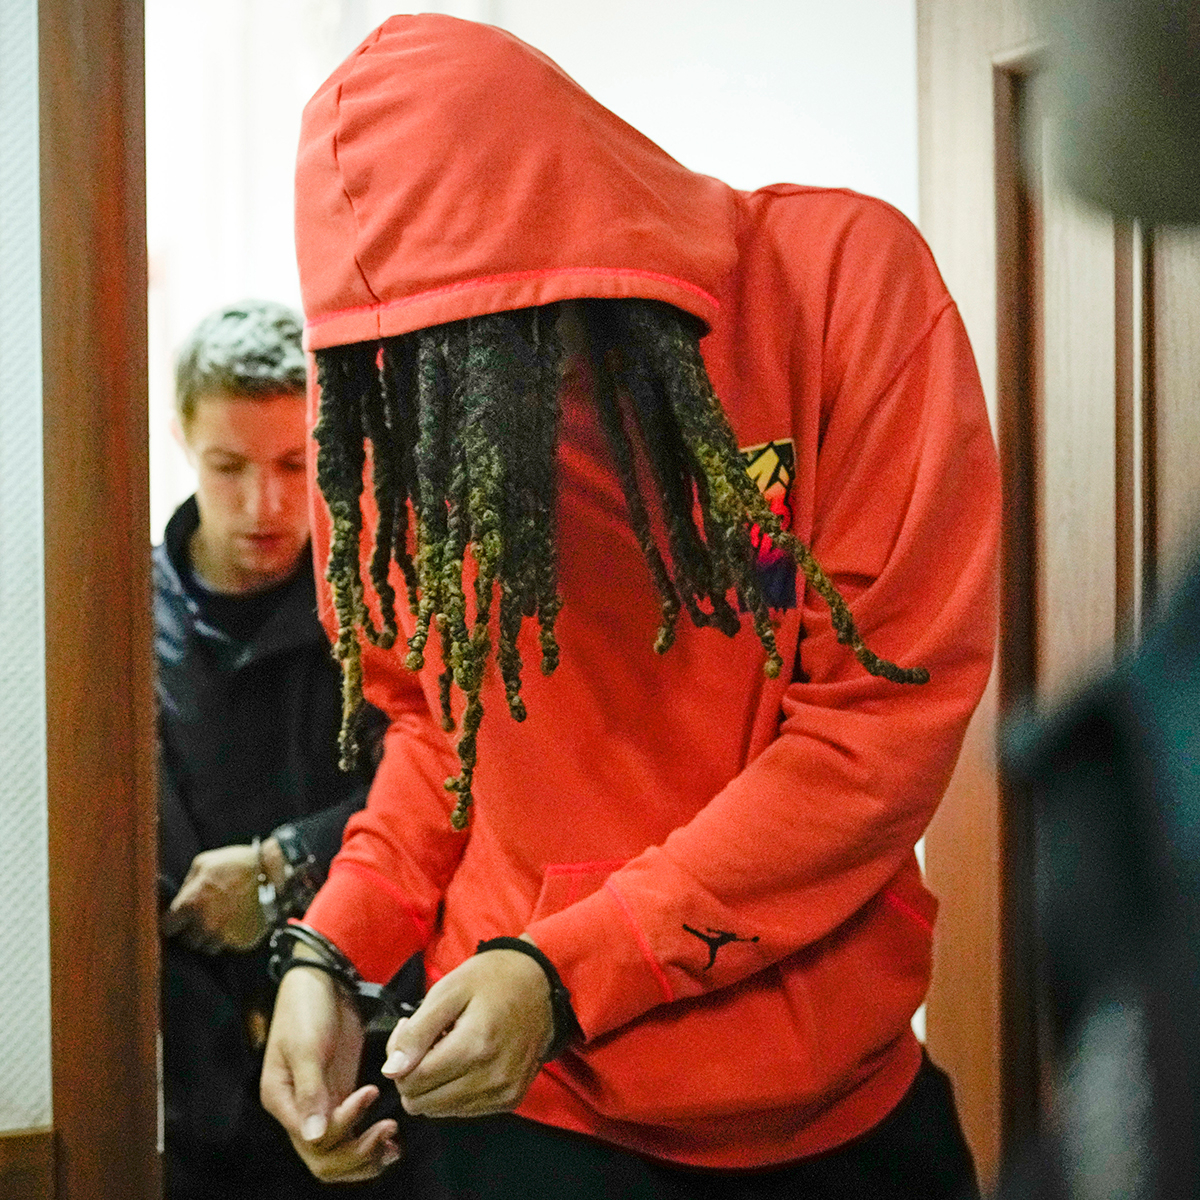 WNBA Star Brittney Griner’s Pre-Trial Detention in Russia Extended